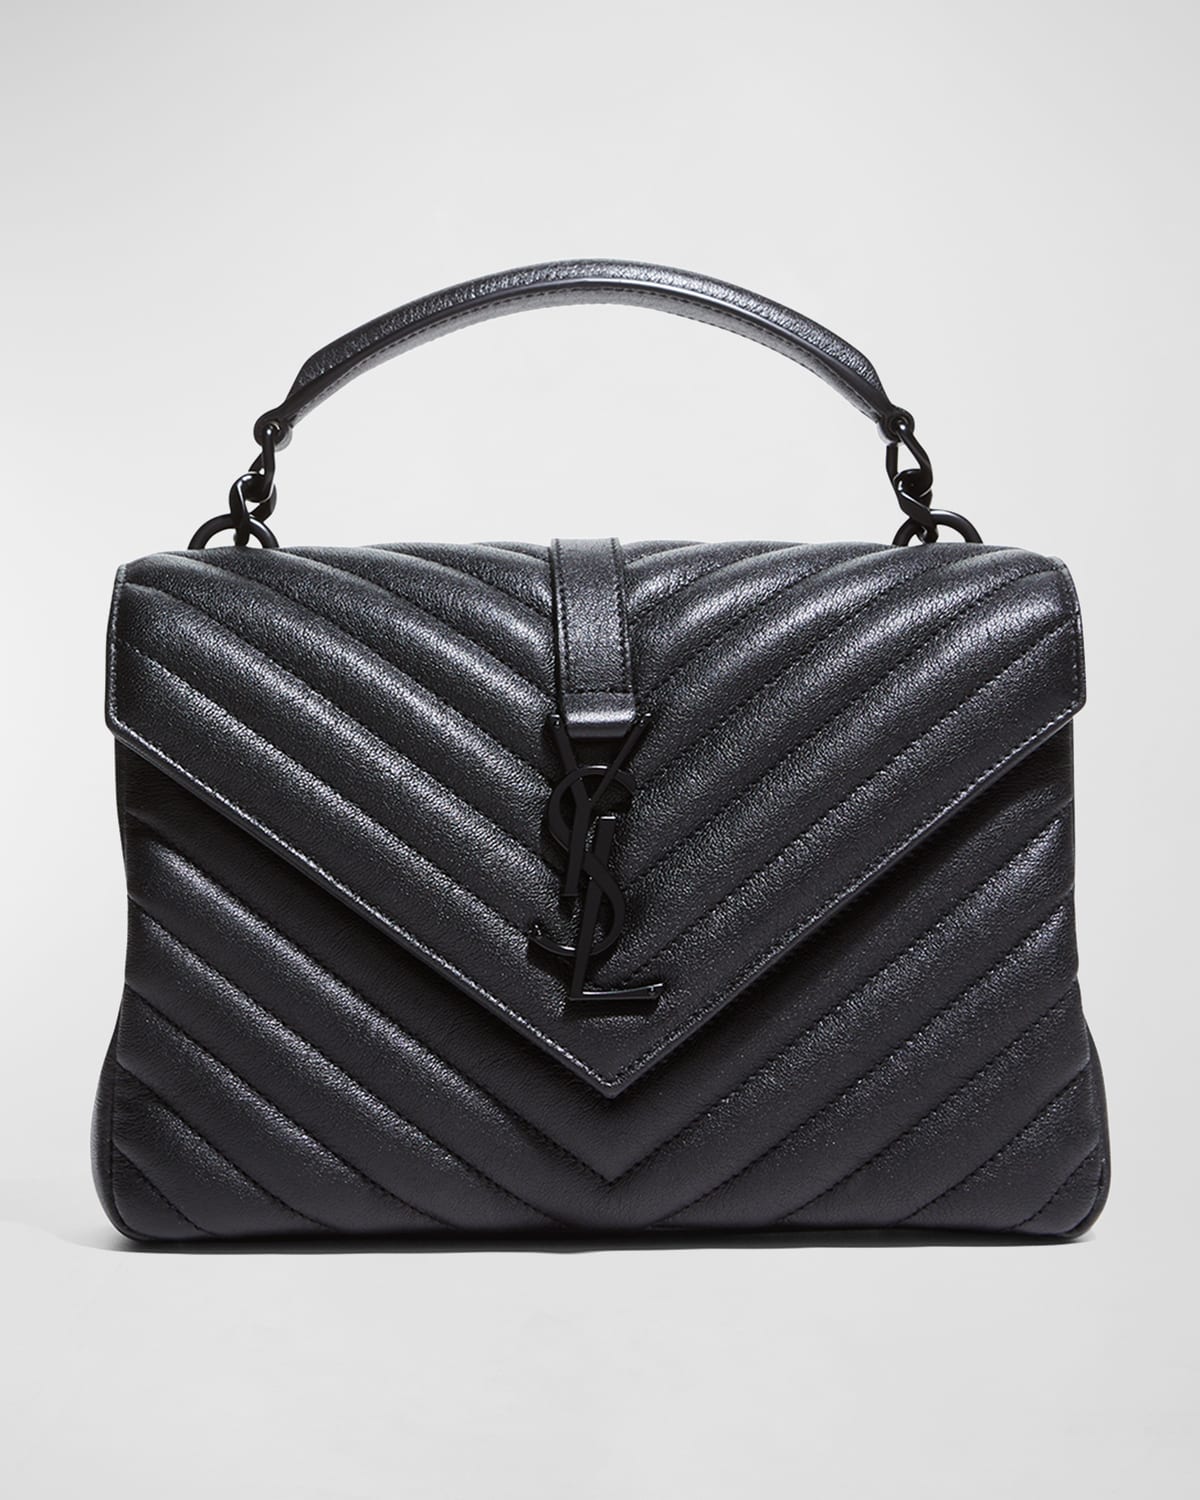 College Medium Flap YSL Shoulder Bag in Quilted Leather